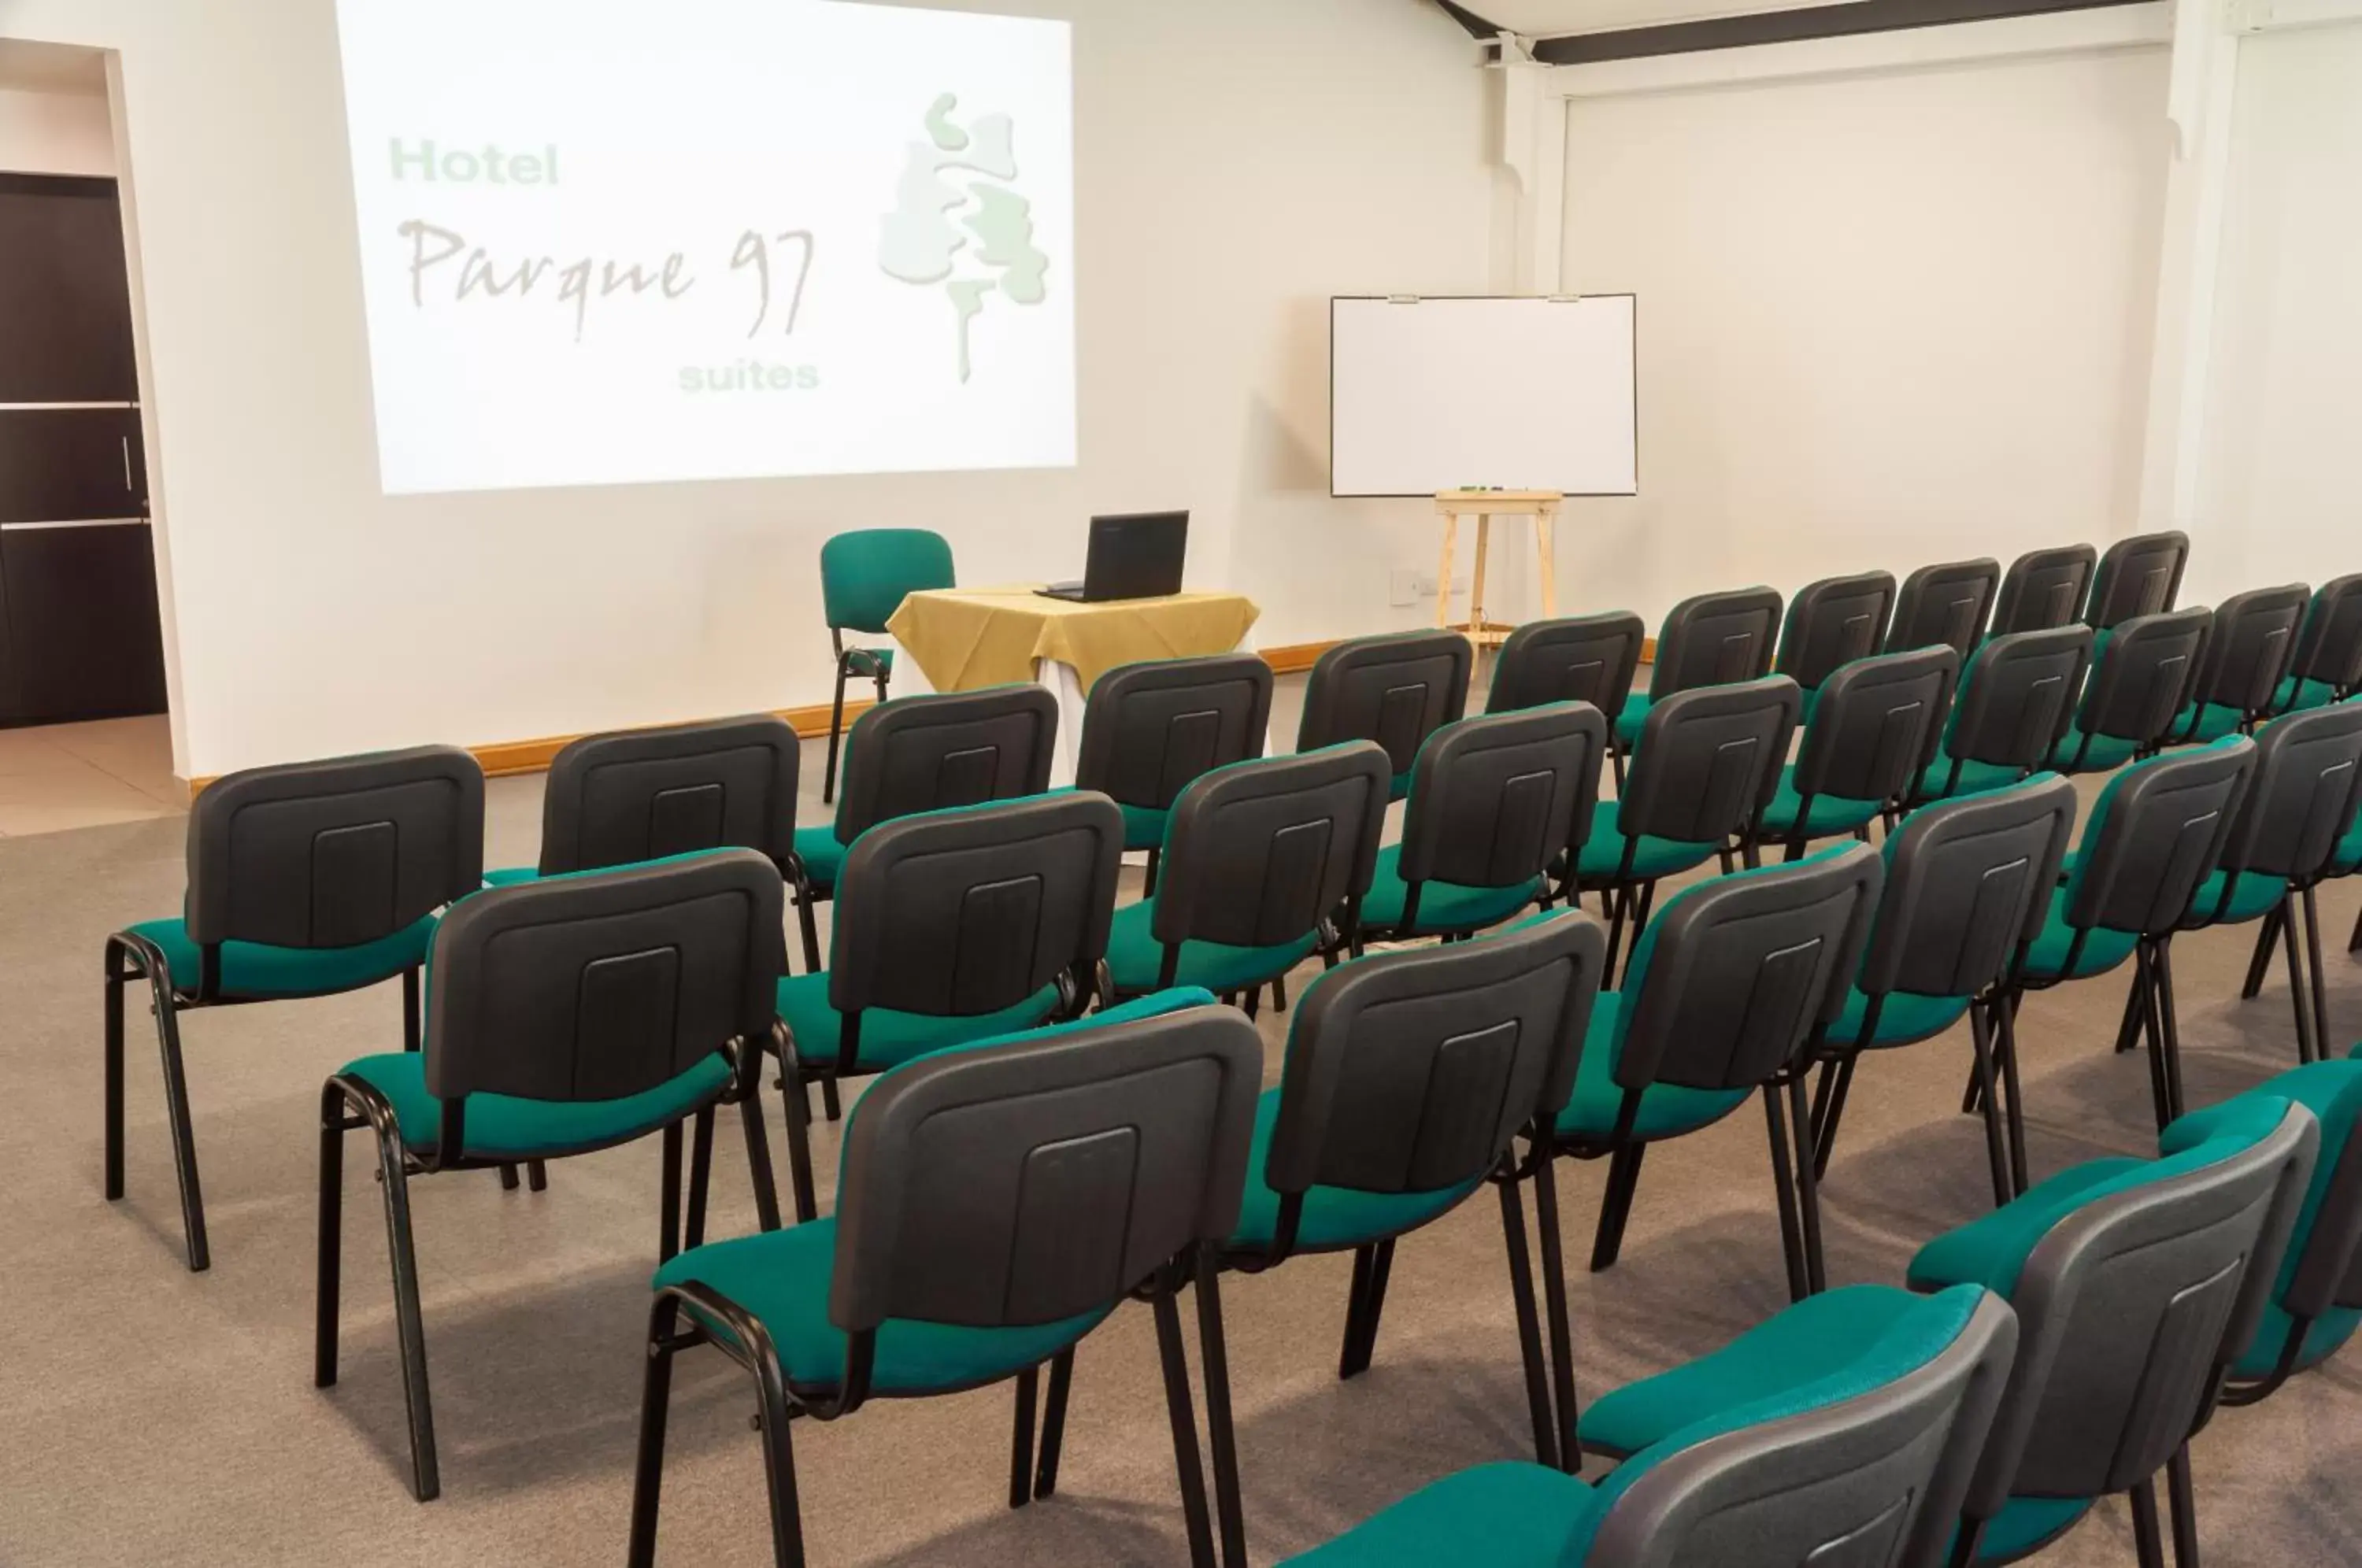 Business facilities, Business Area/Conference Room in Hotel Parque 97 Suites